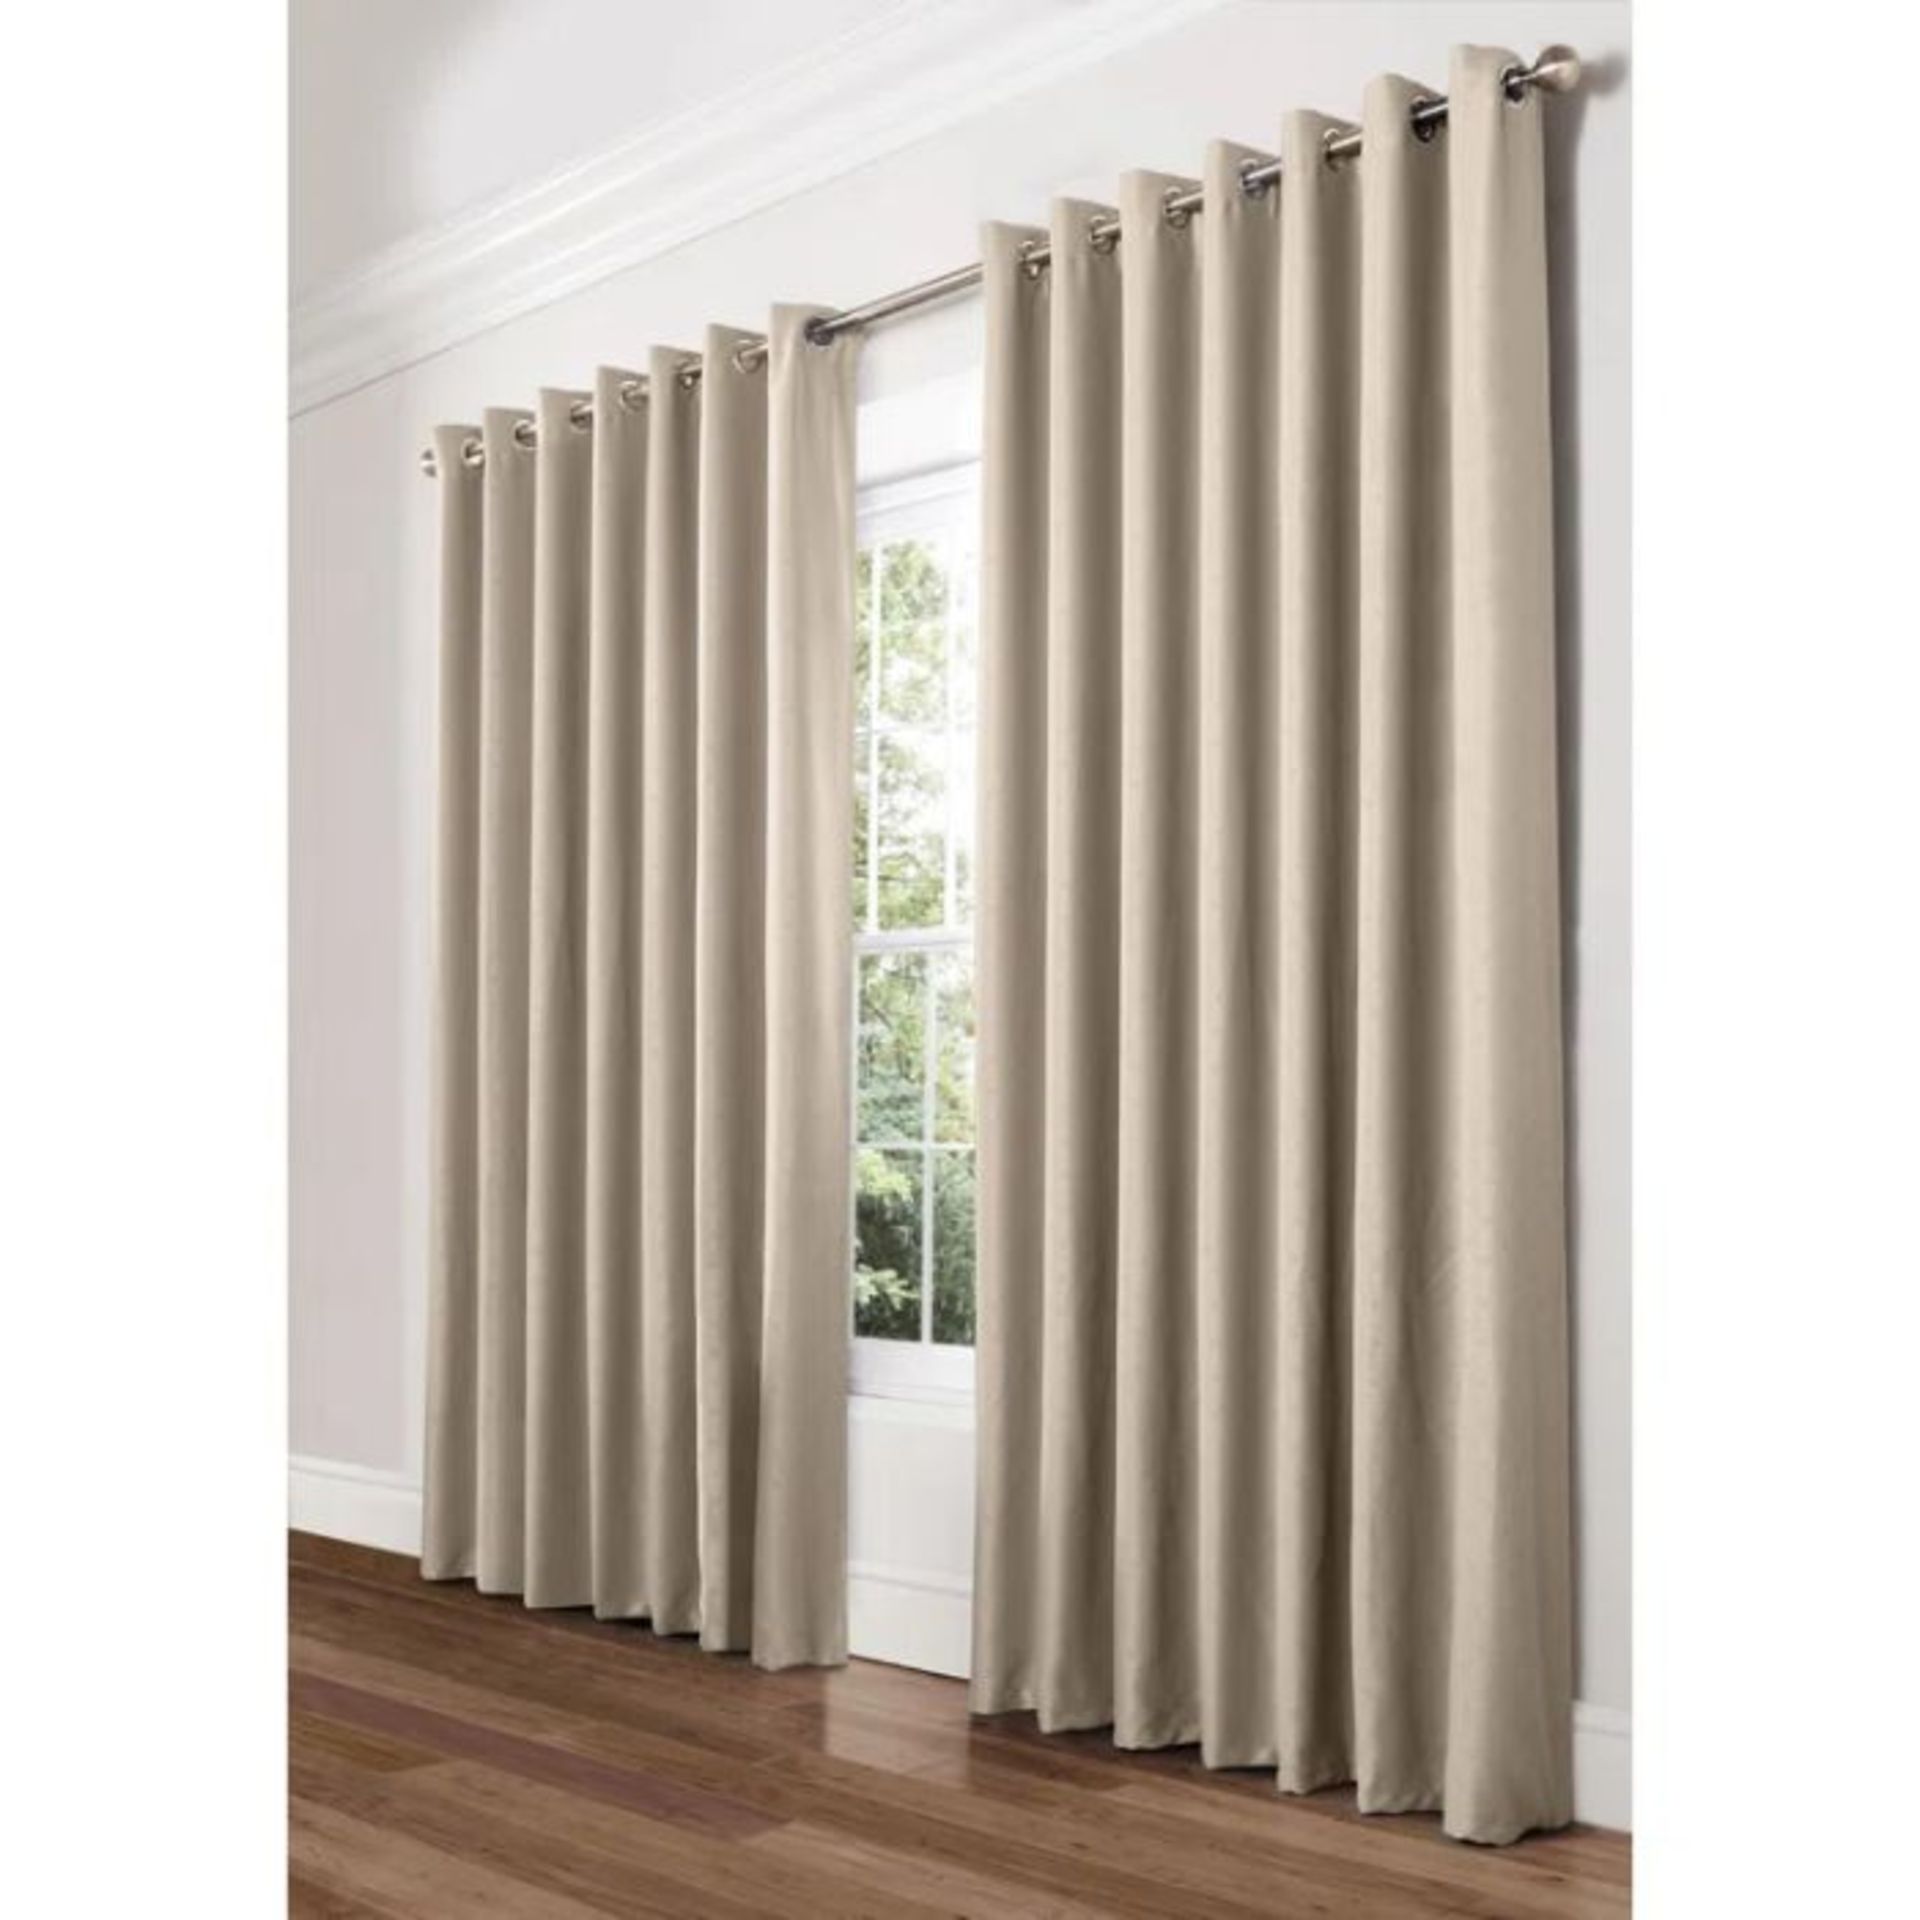 Ebern Designs, Frodine Thermal Blackout Curtain (CREAM) (229 W x 183 D cm) - RRP£46.59(HFFA1042 - - Image 4 of 4